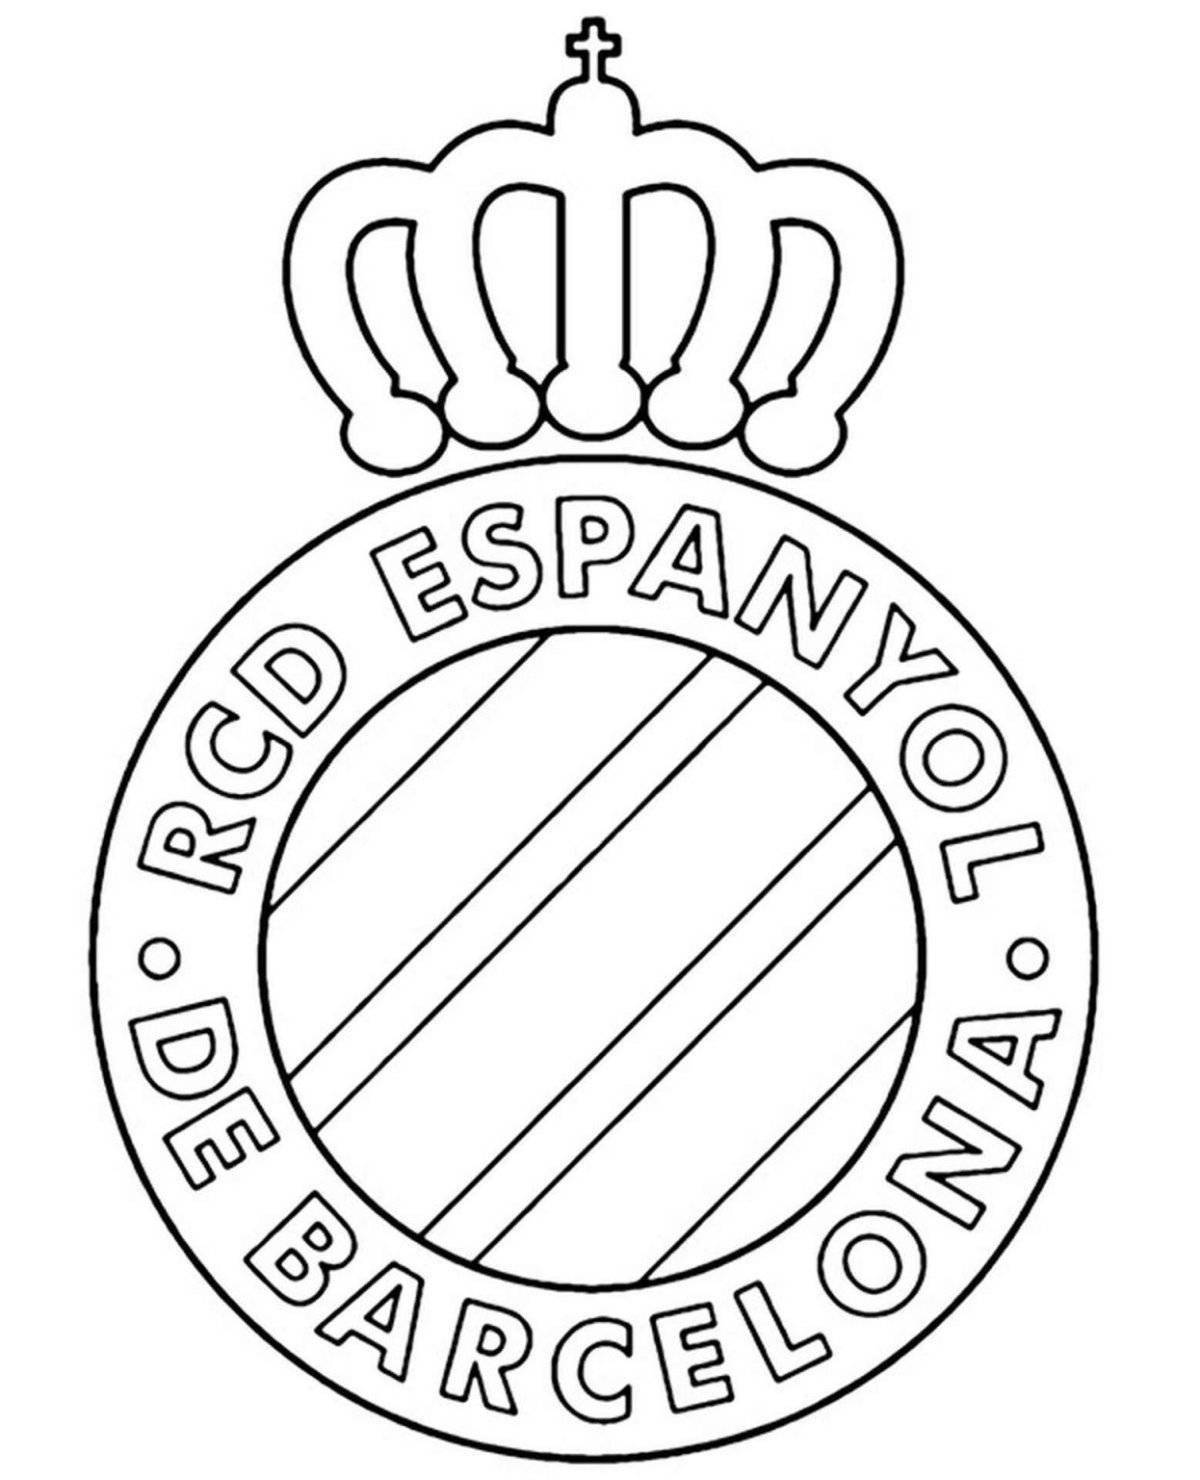 Exquisite psg icon coloring page